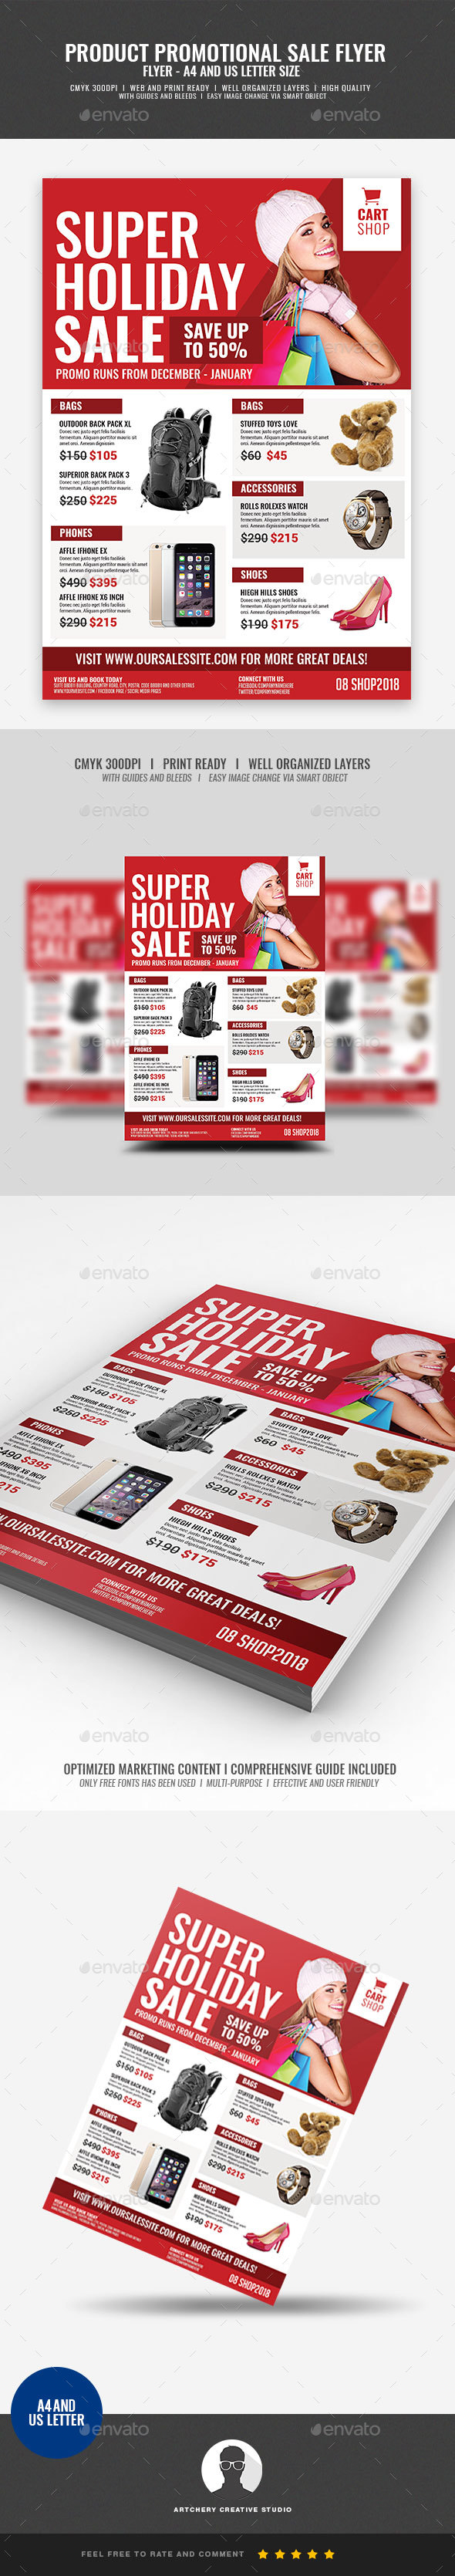 GraphicRiver Product Sale Promotional Flyer 21008985